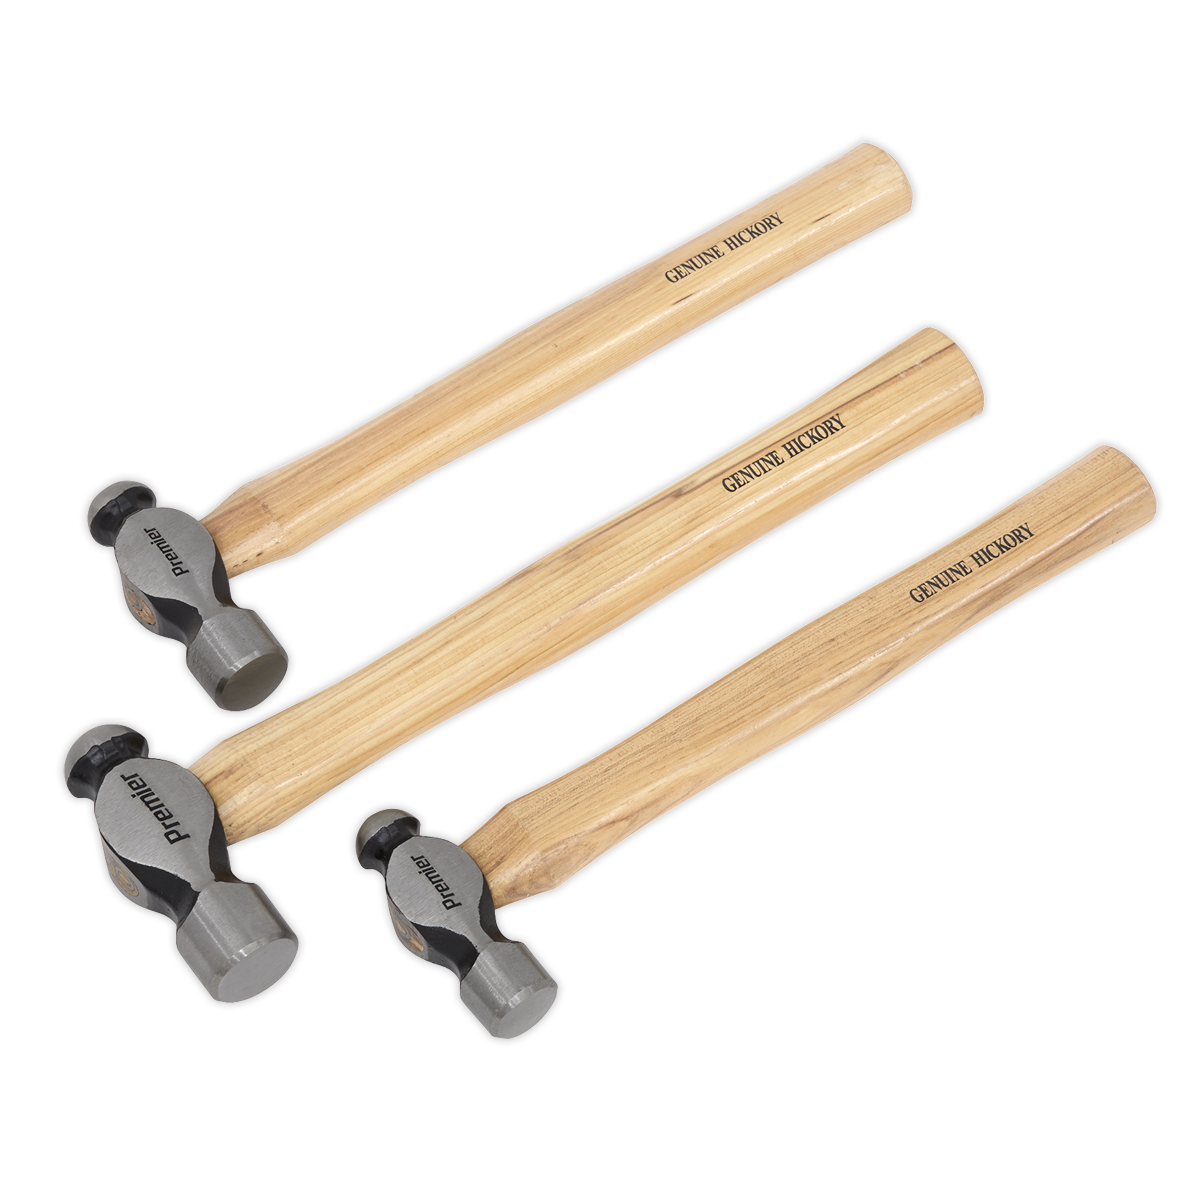 Sealey 3pc Ball Pein Hammer Set with Hickory Shafts AK203